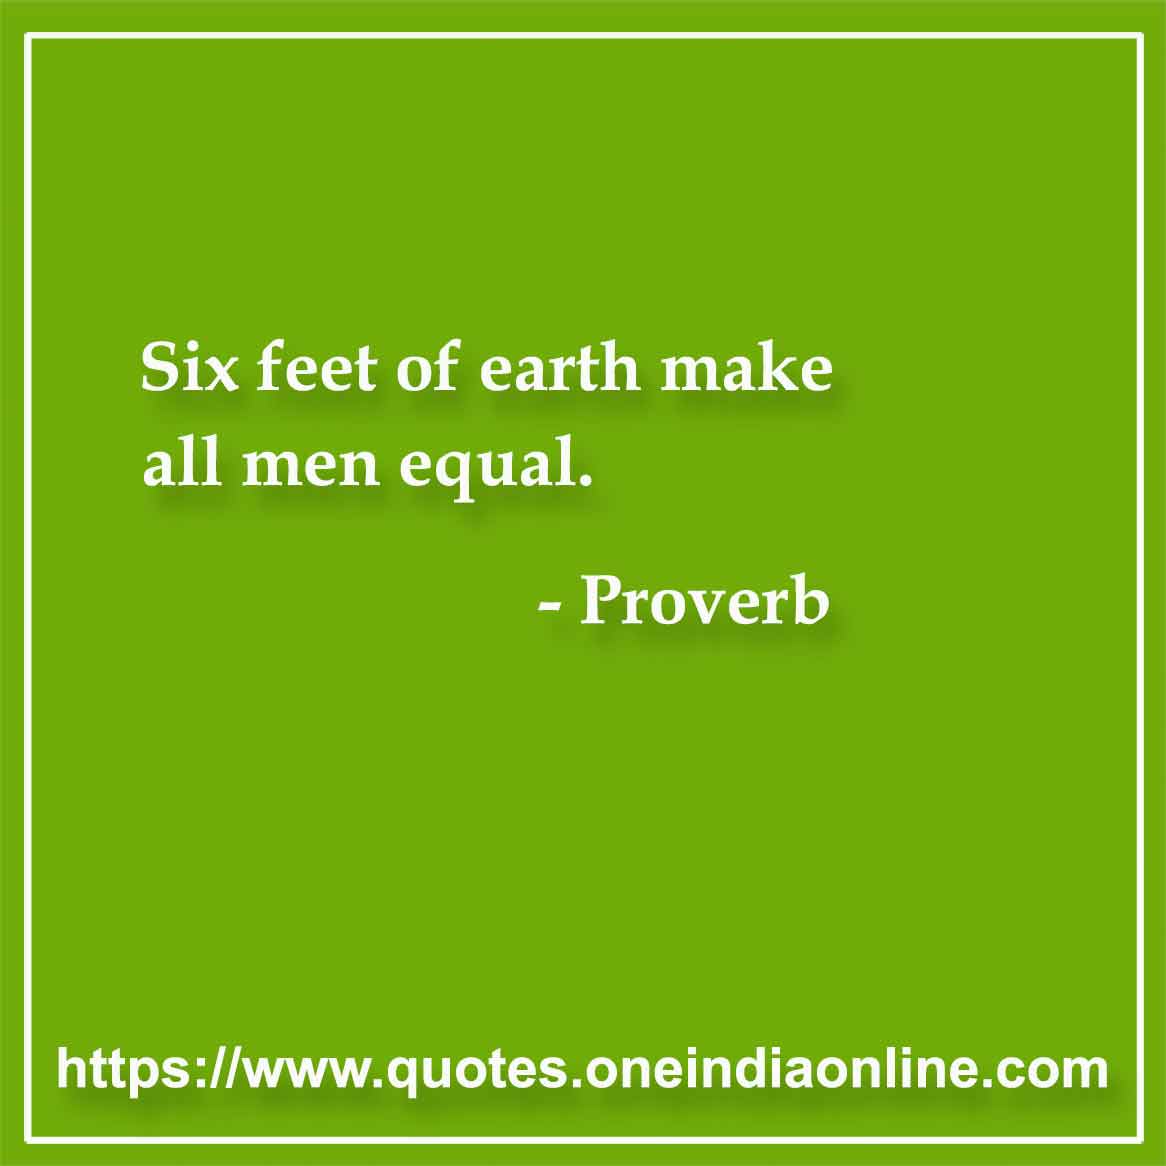 Six feet of earth make all men equal. 

- Proverb